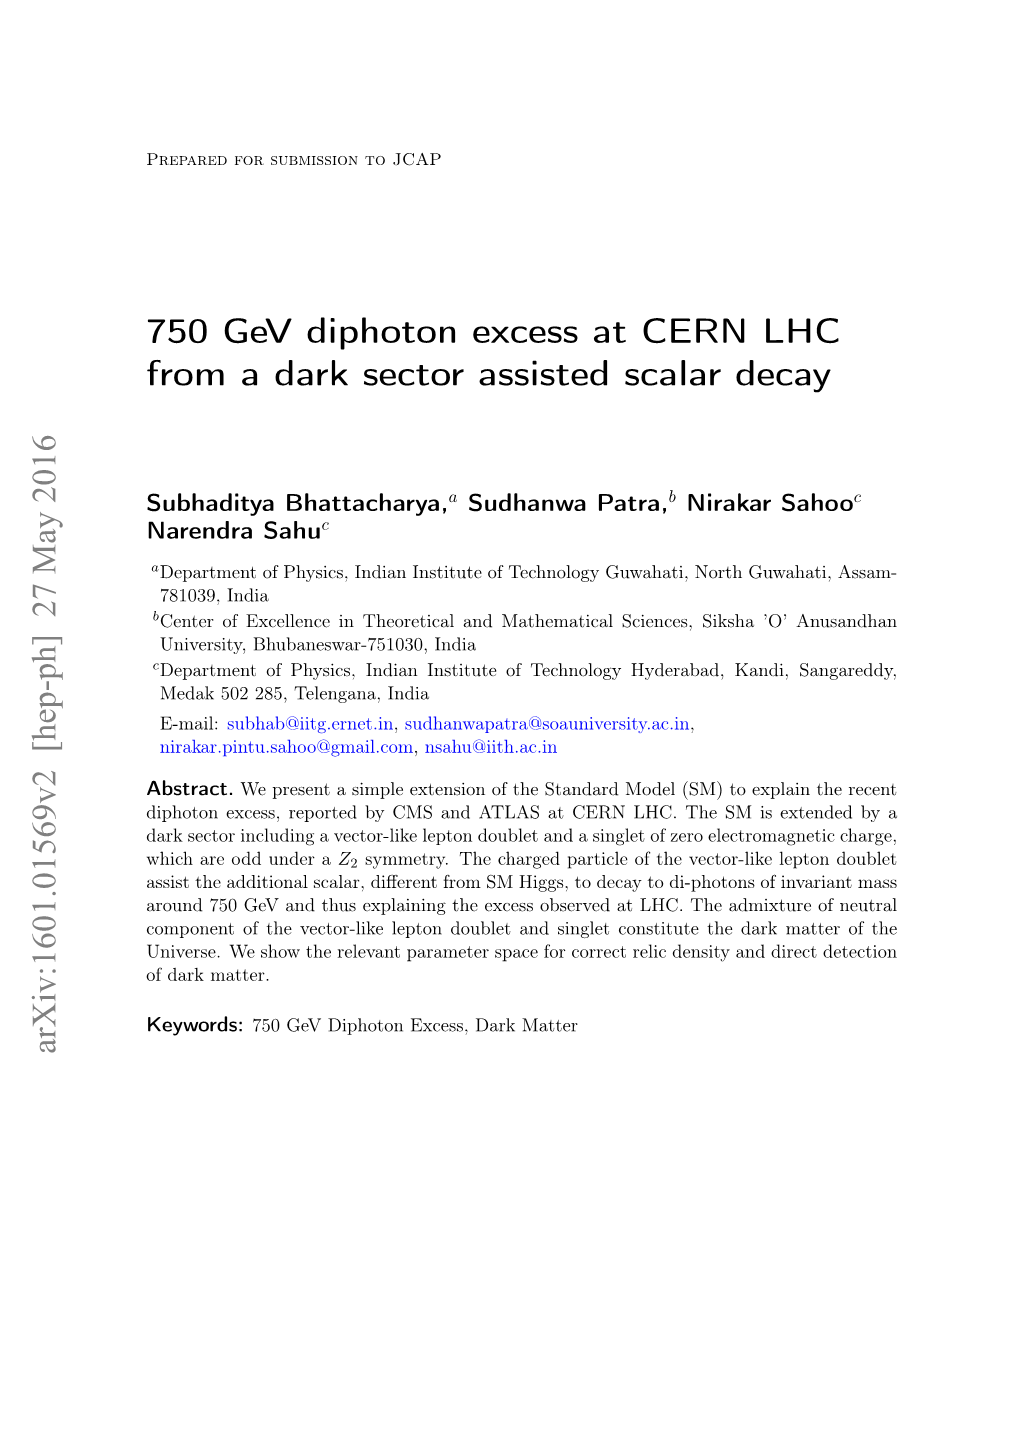 750 Gev Diphoton Excess at CERN LHC from a Dark Sector Assisted Scalar Decay